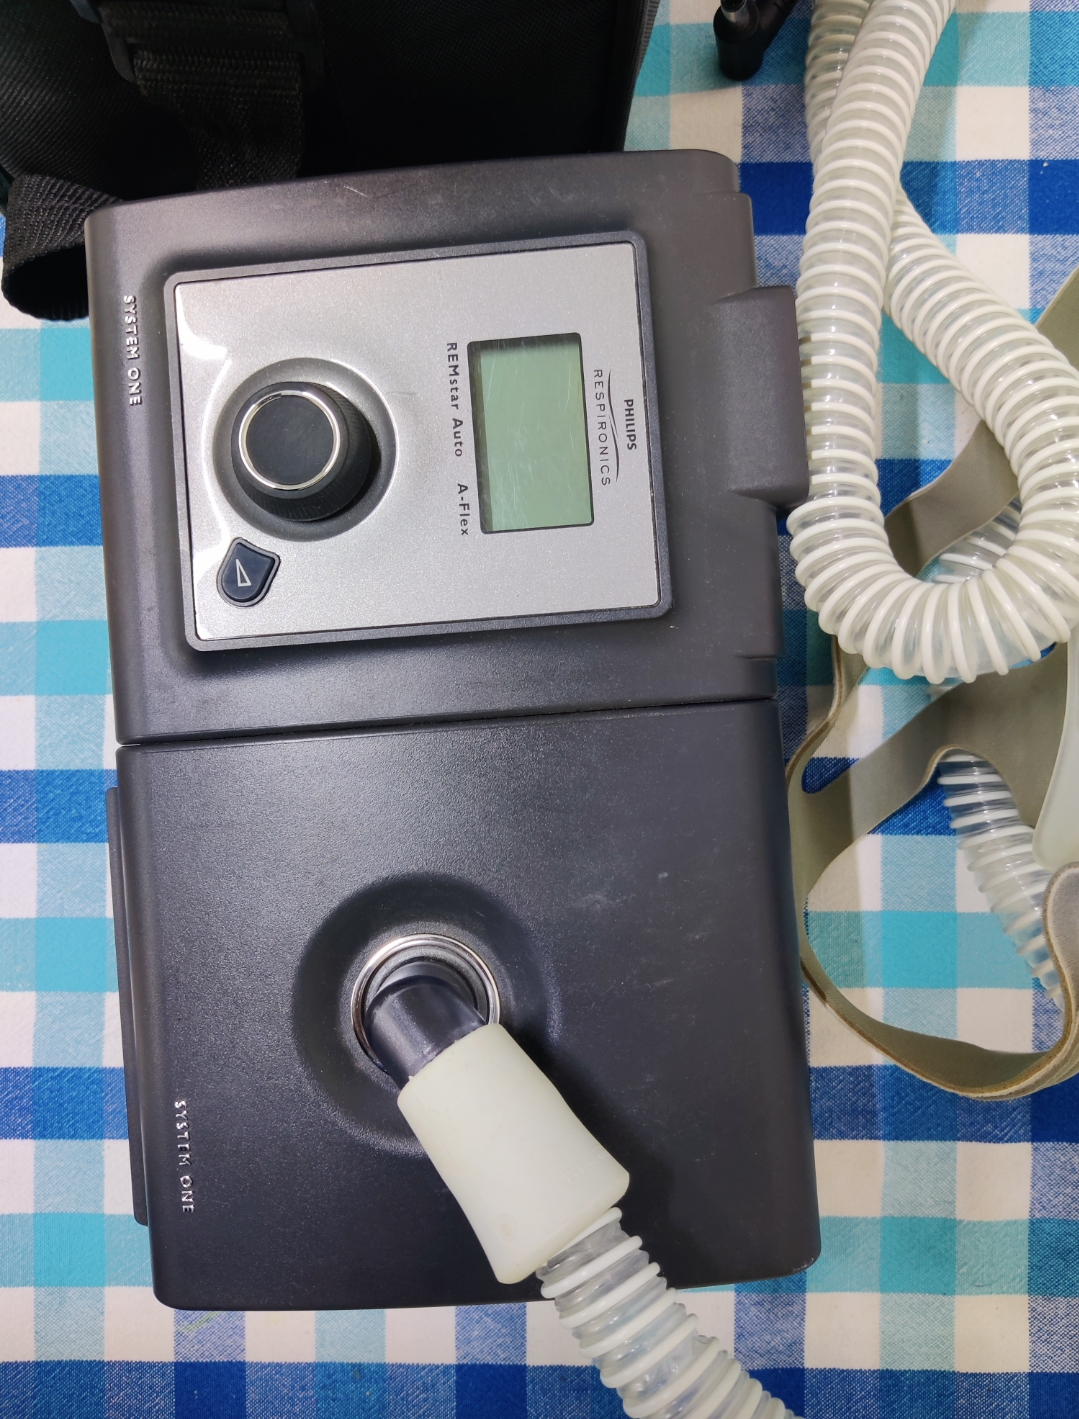 Philips Cpap Breathing Machine - Not Used 